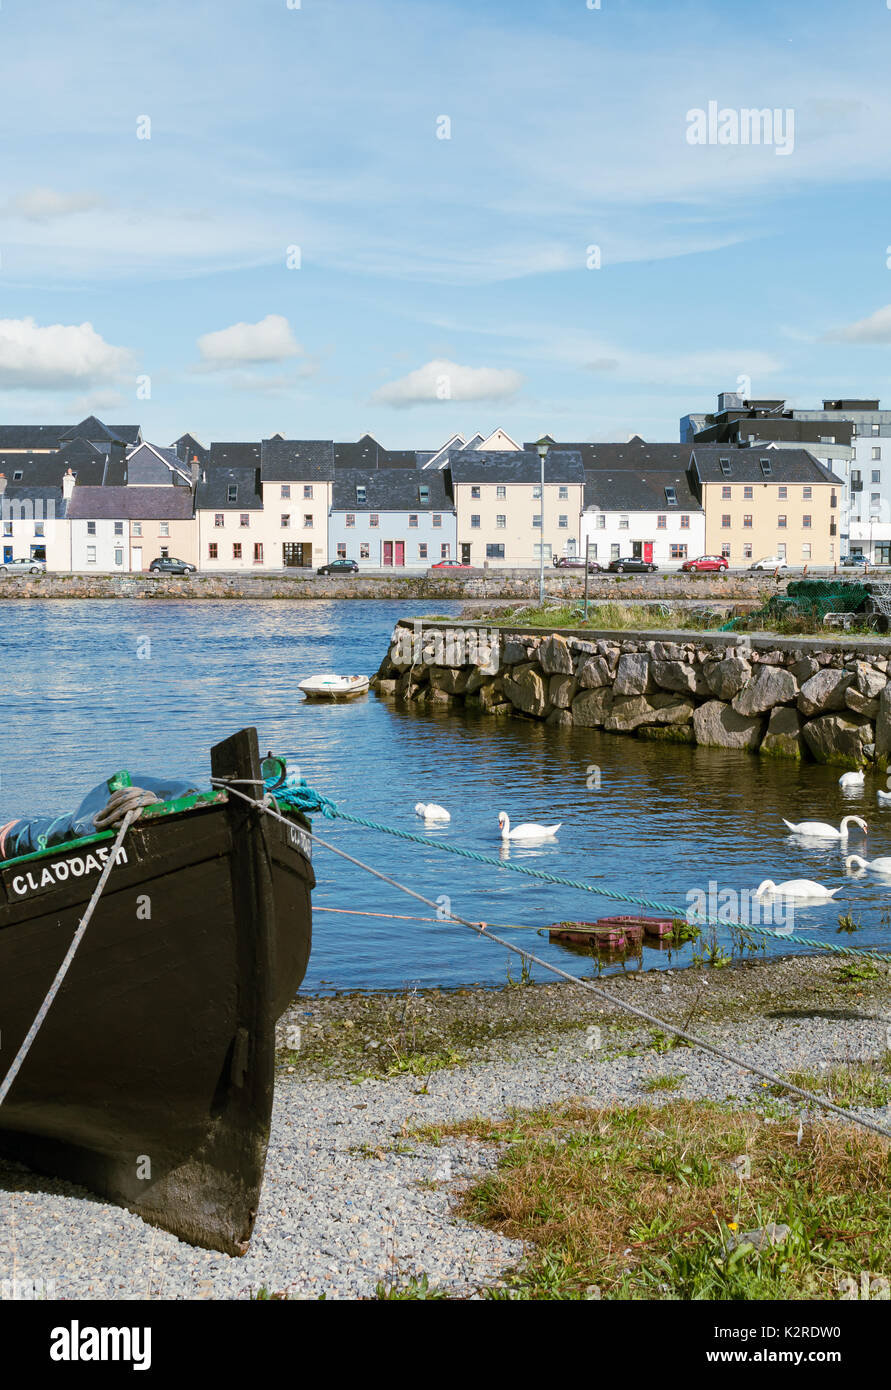 Galway hooker and swans near the Claddagh in Galway Bay, Ireland Stock Photo